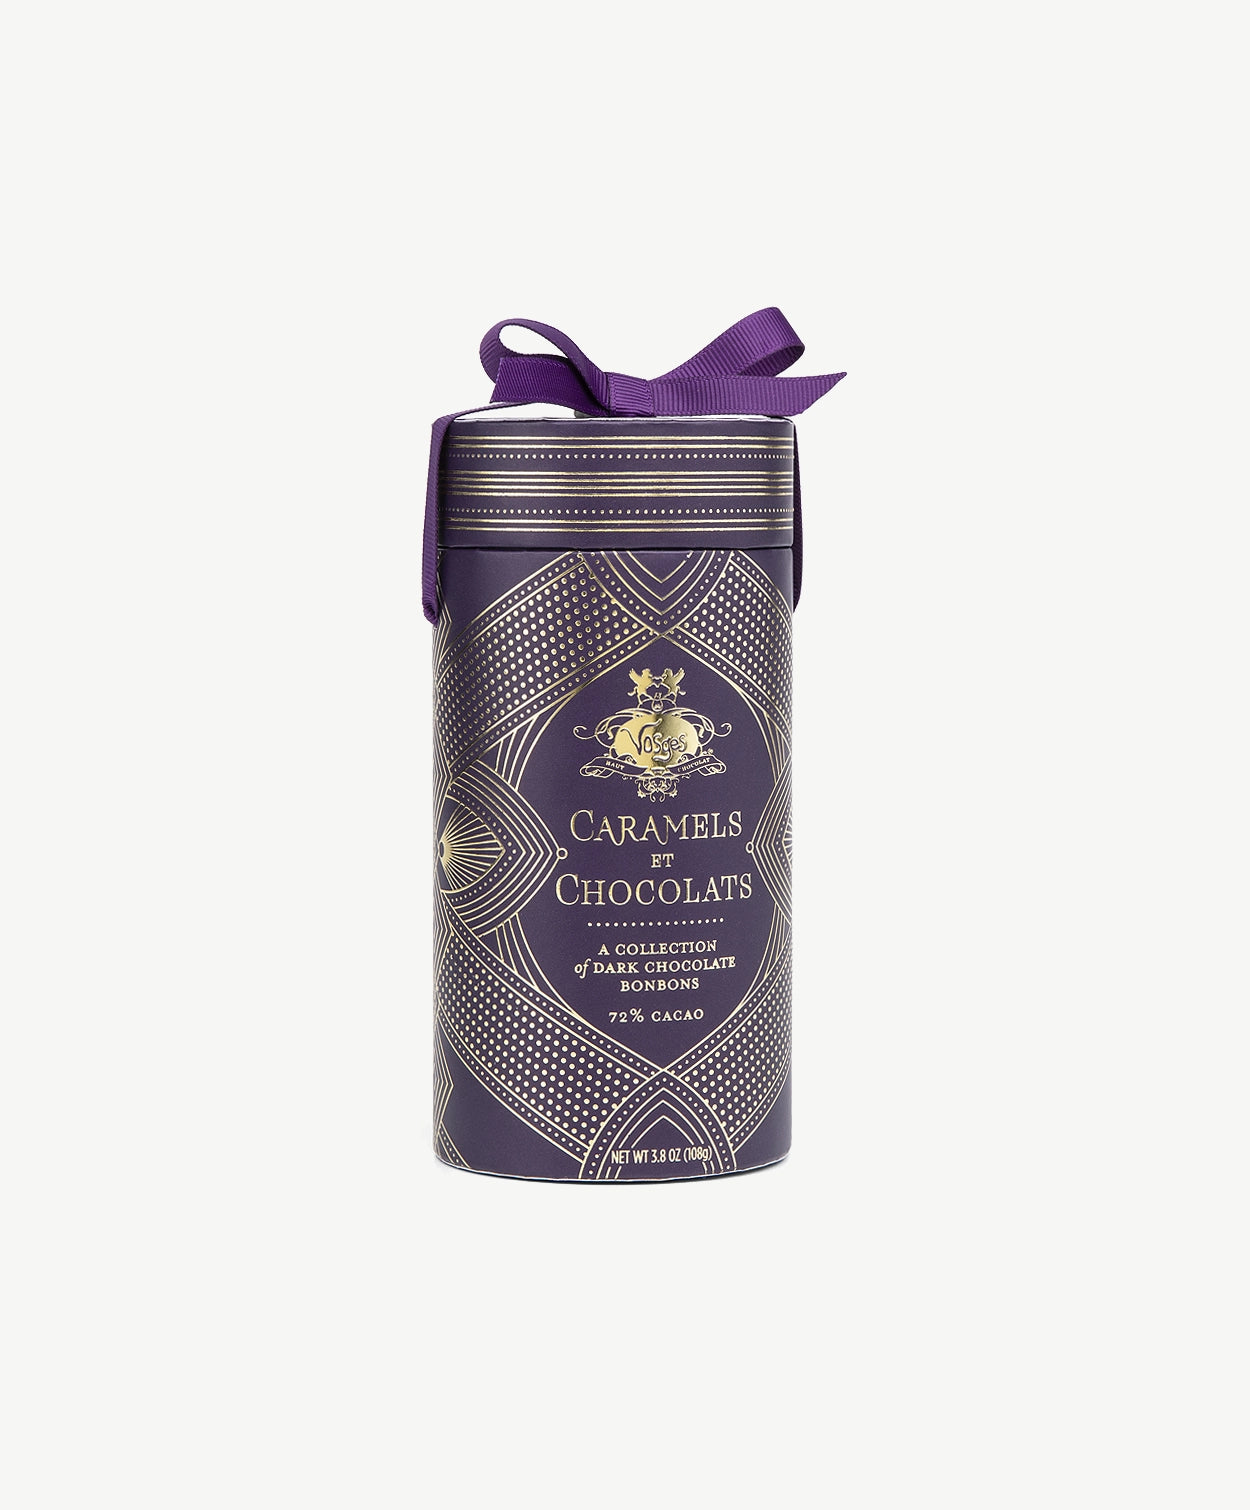 A purple tube embossed with gold foil reading, "Caramels et Chocolats" tied with a purple ribbon bow stands against a light grey background.